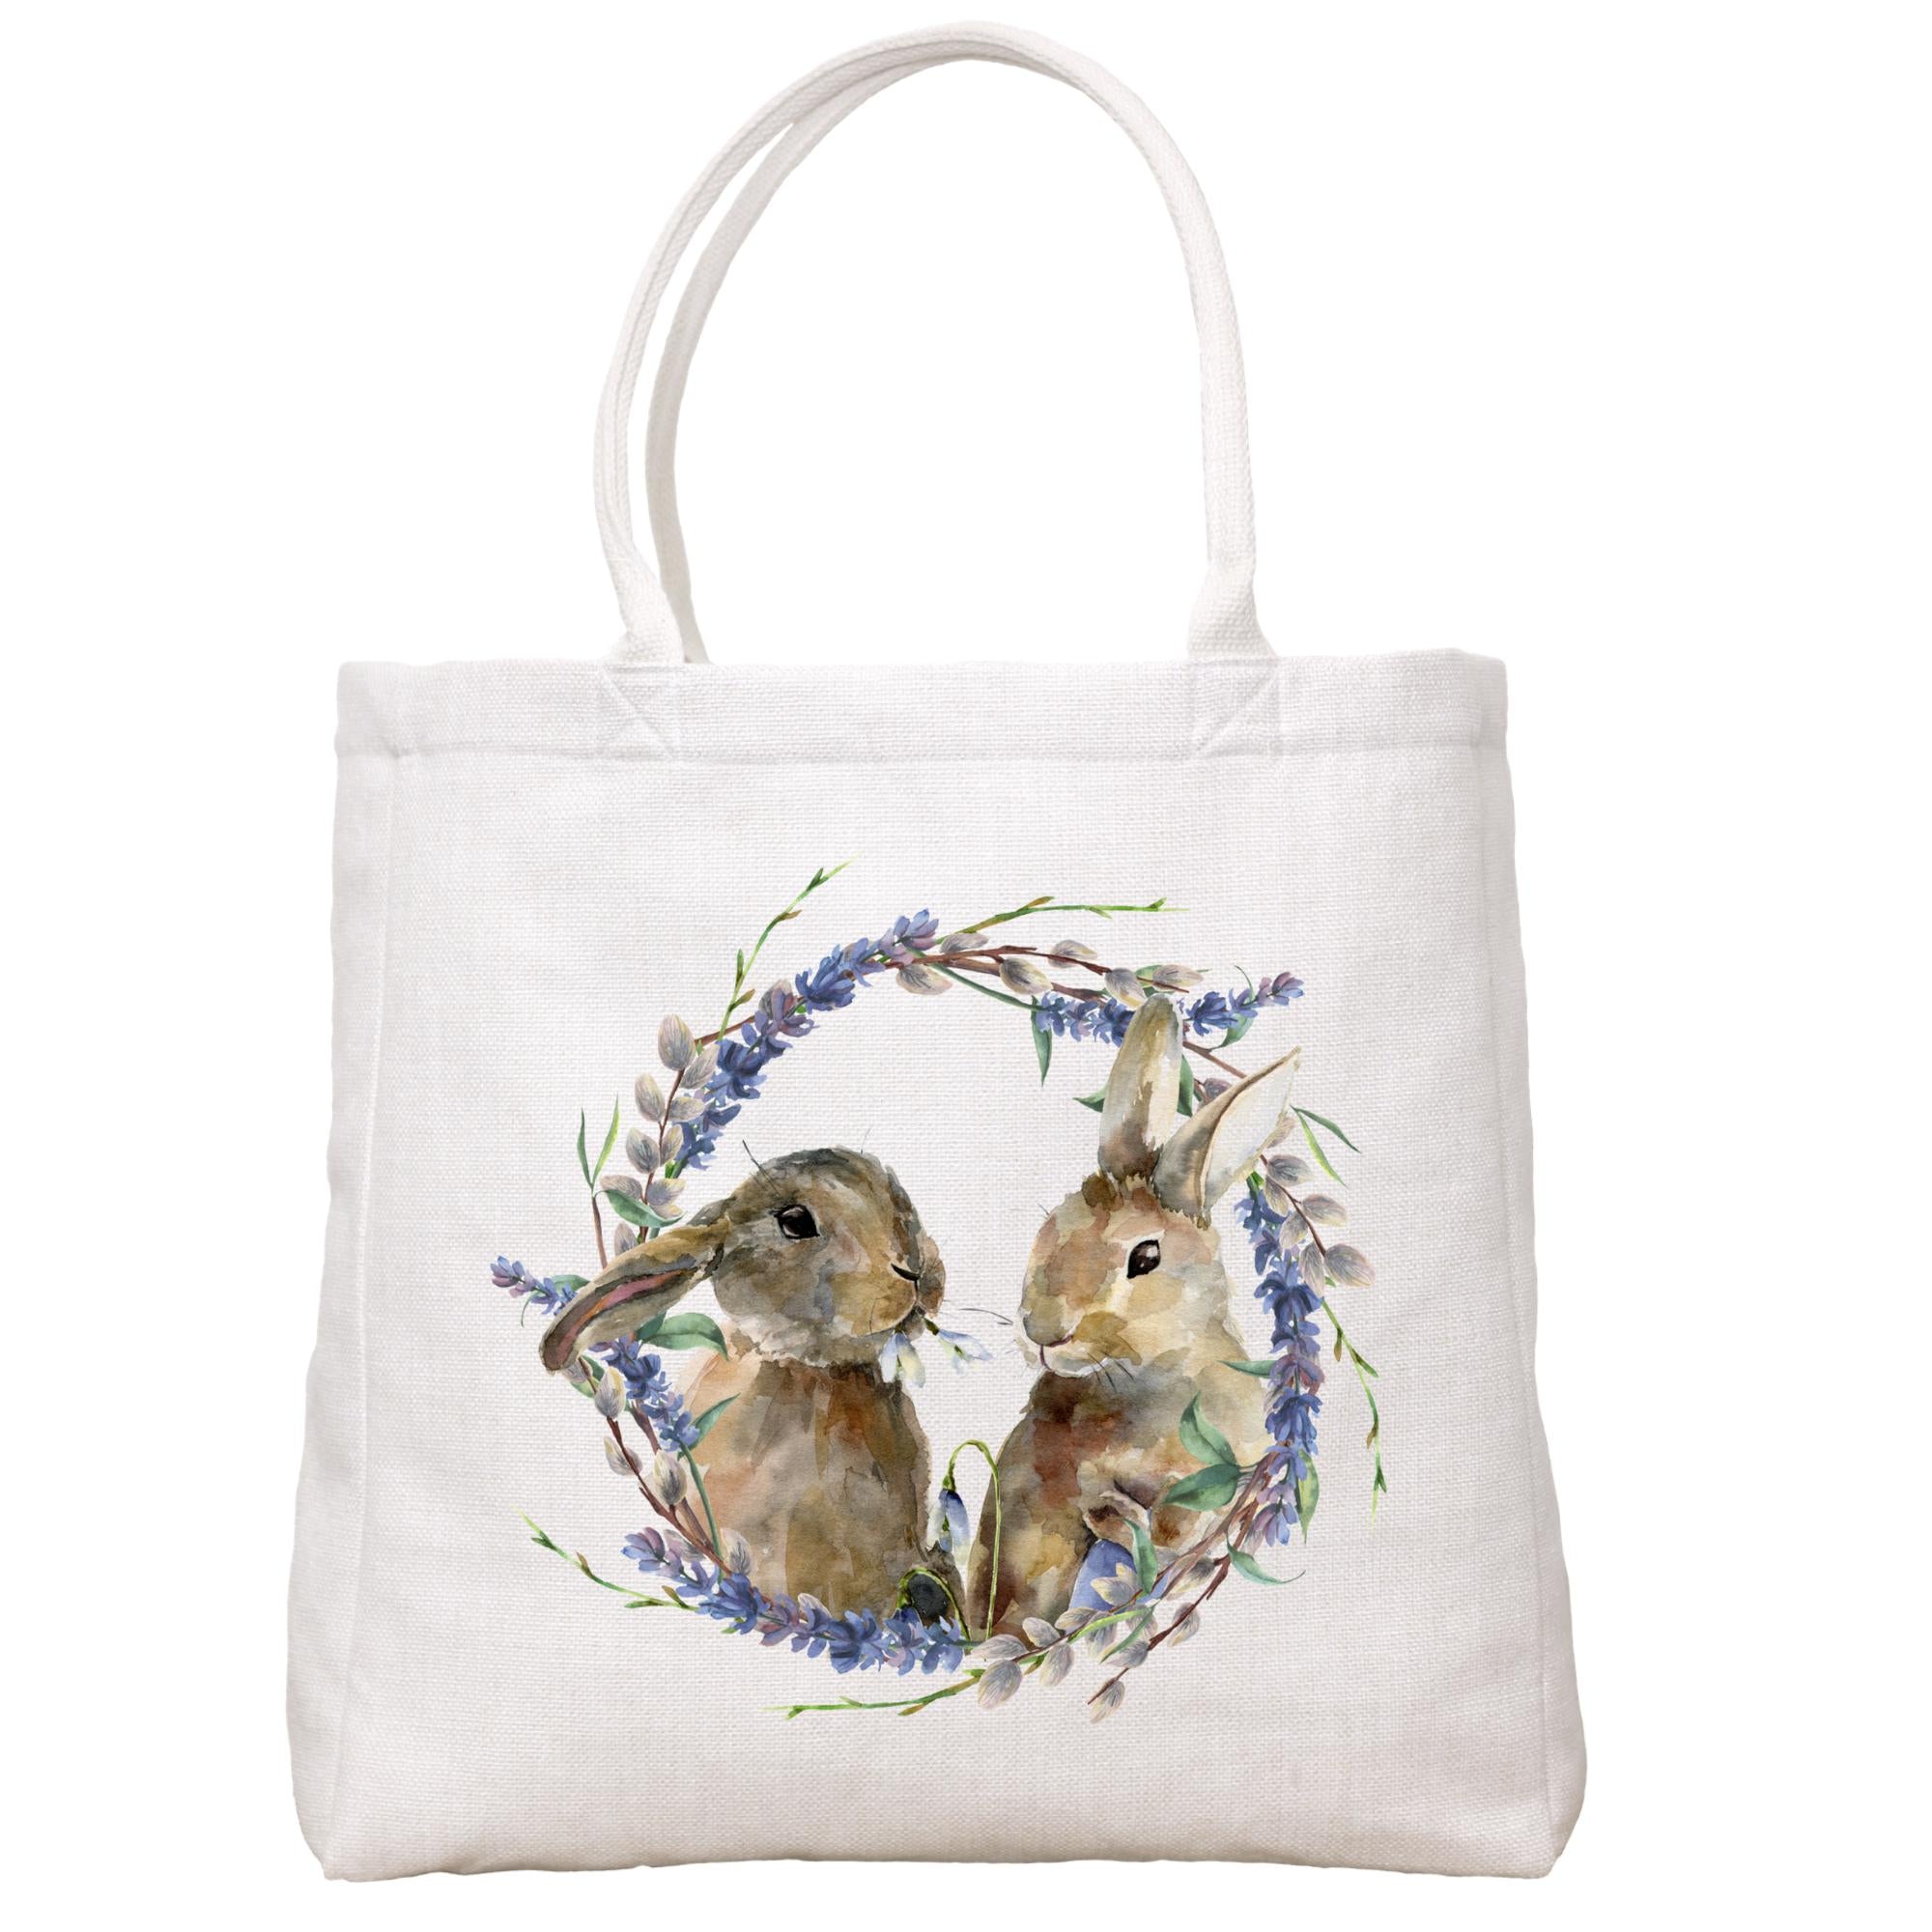 Two Bunnies In Wreath Tote Bag